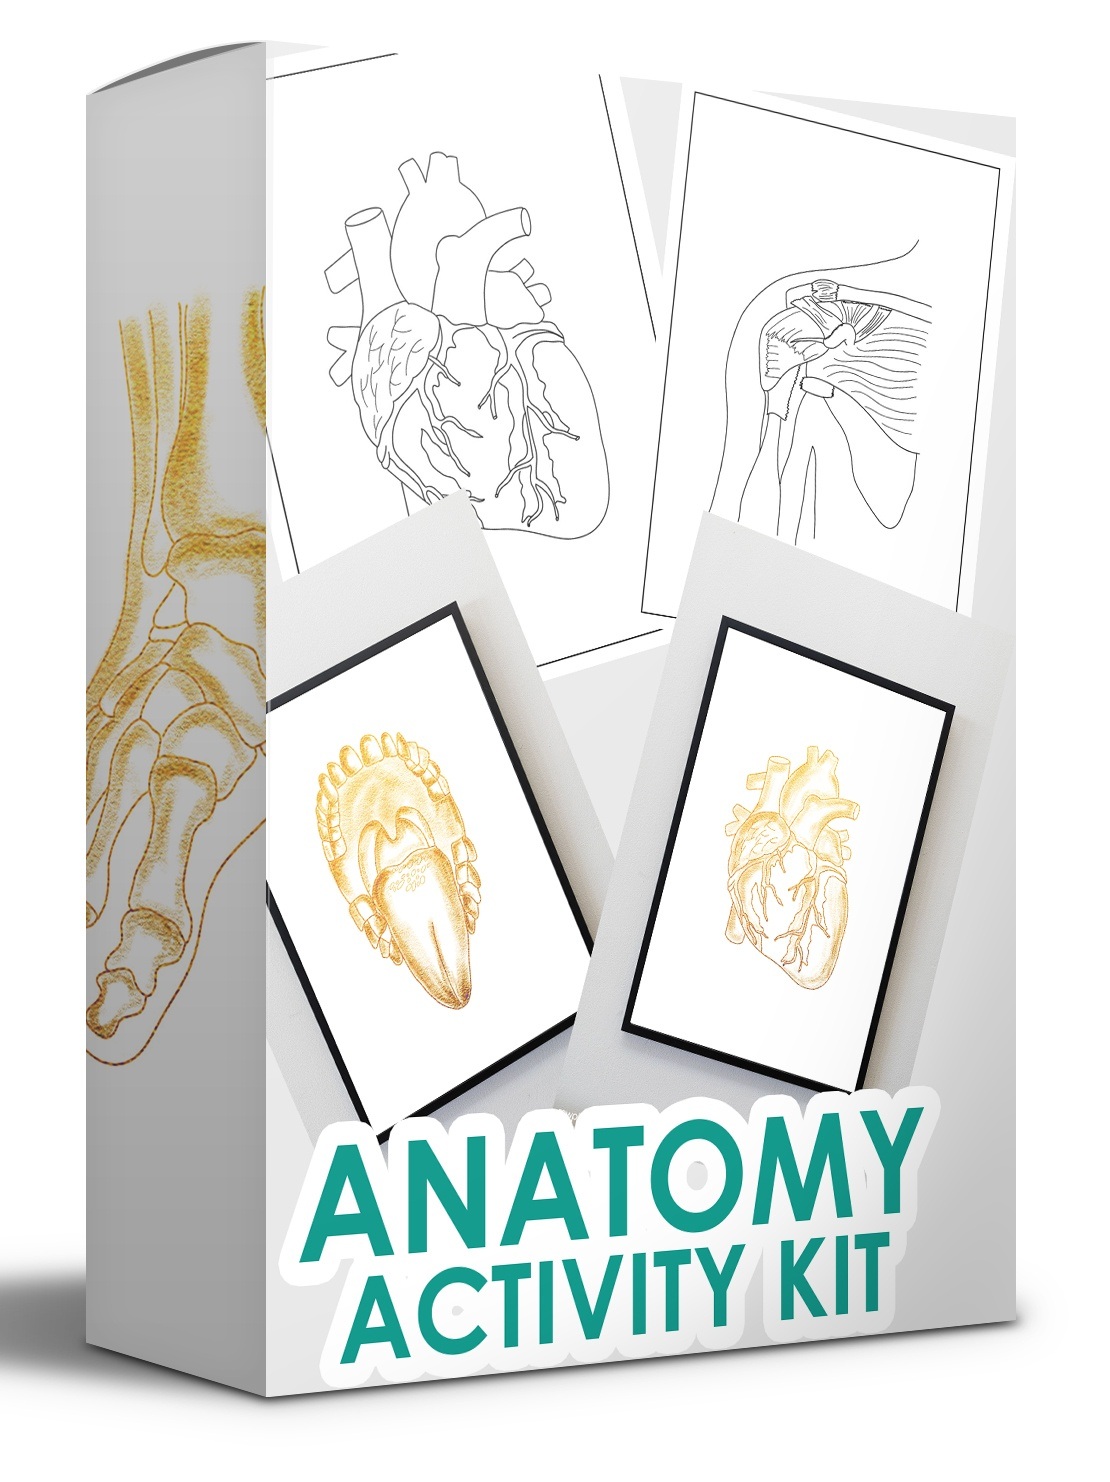 [GET] Anatomy Activity Kit – Coloring Book Free Download